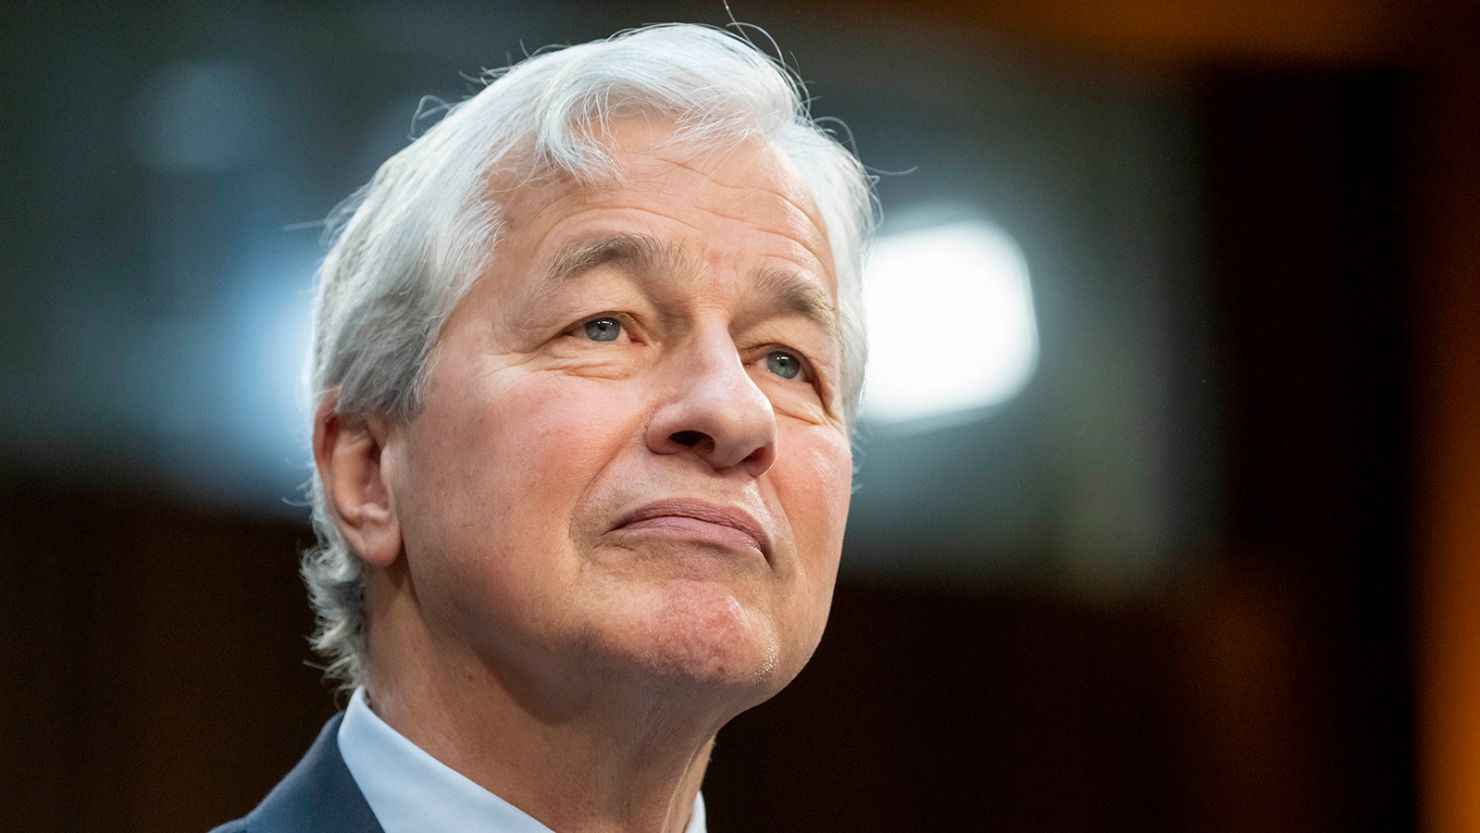 Jamie Dimon, JPMorgan CEO, pictured during a hearing by the US Senate Committee on Banking, Housing, and Urban Affairs to examine Wall Street firms in December 2023 in Washington, DC.